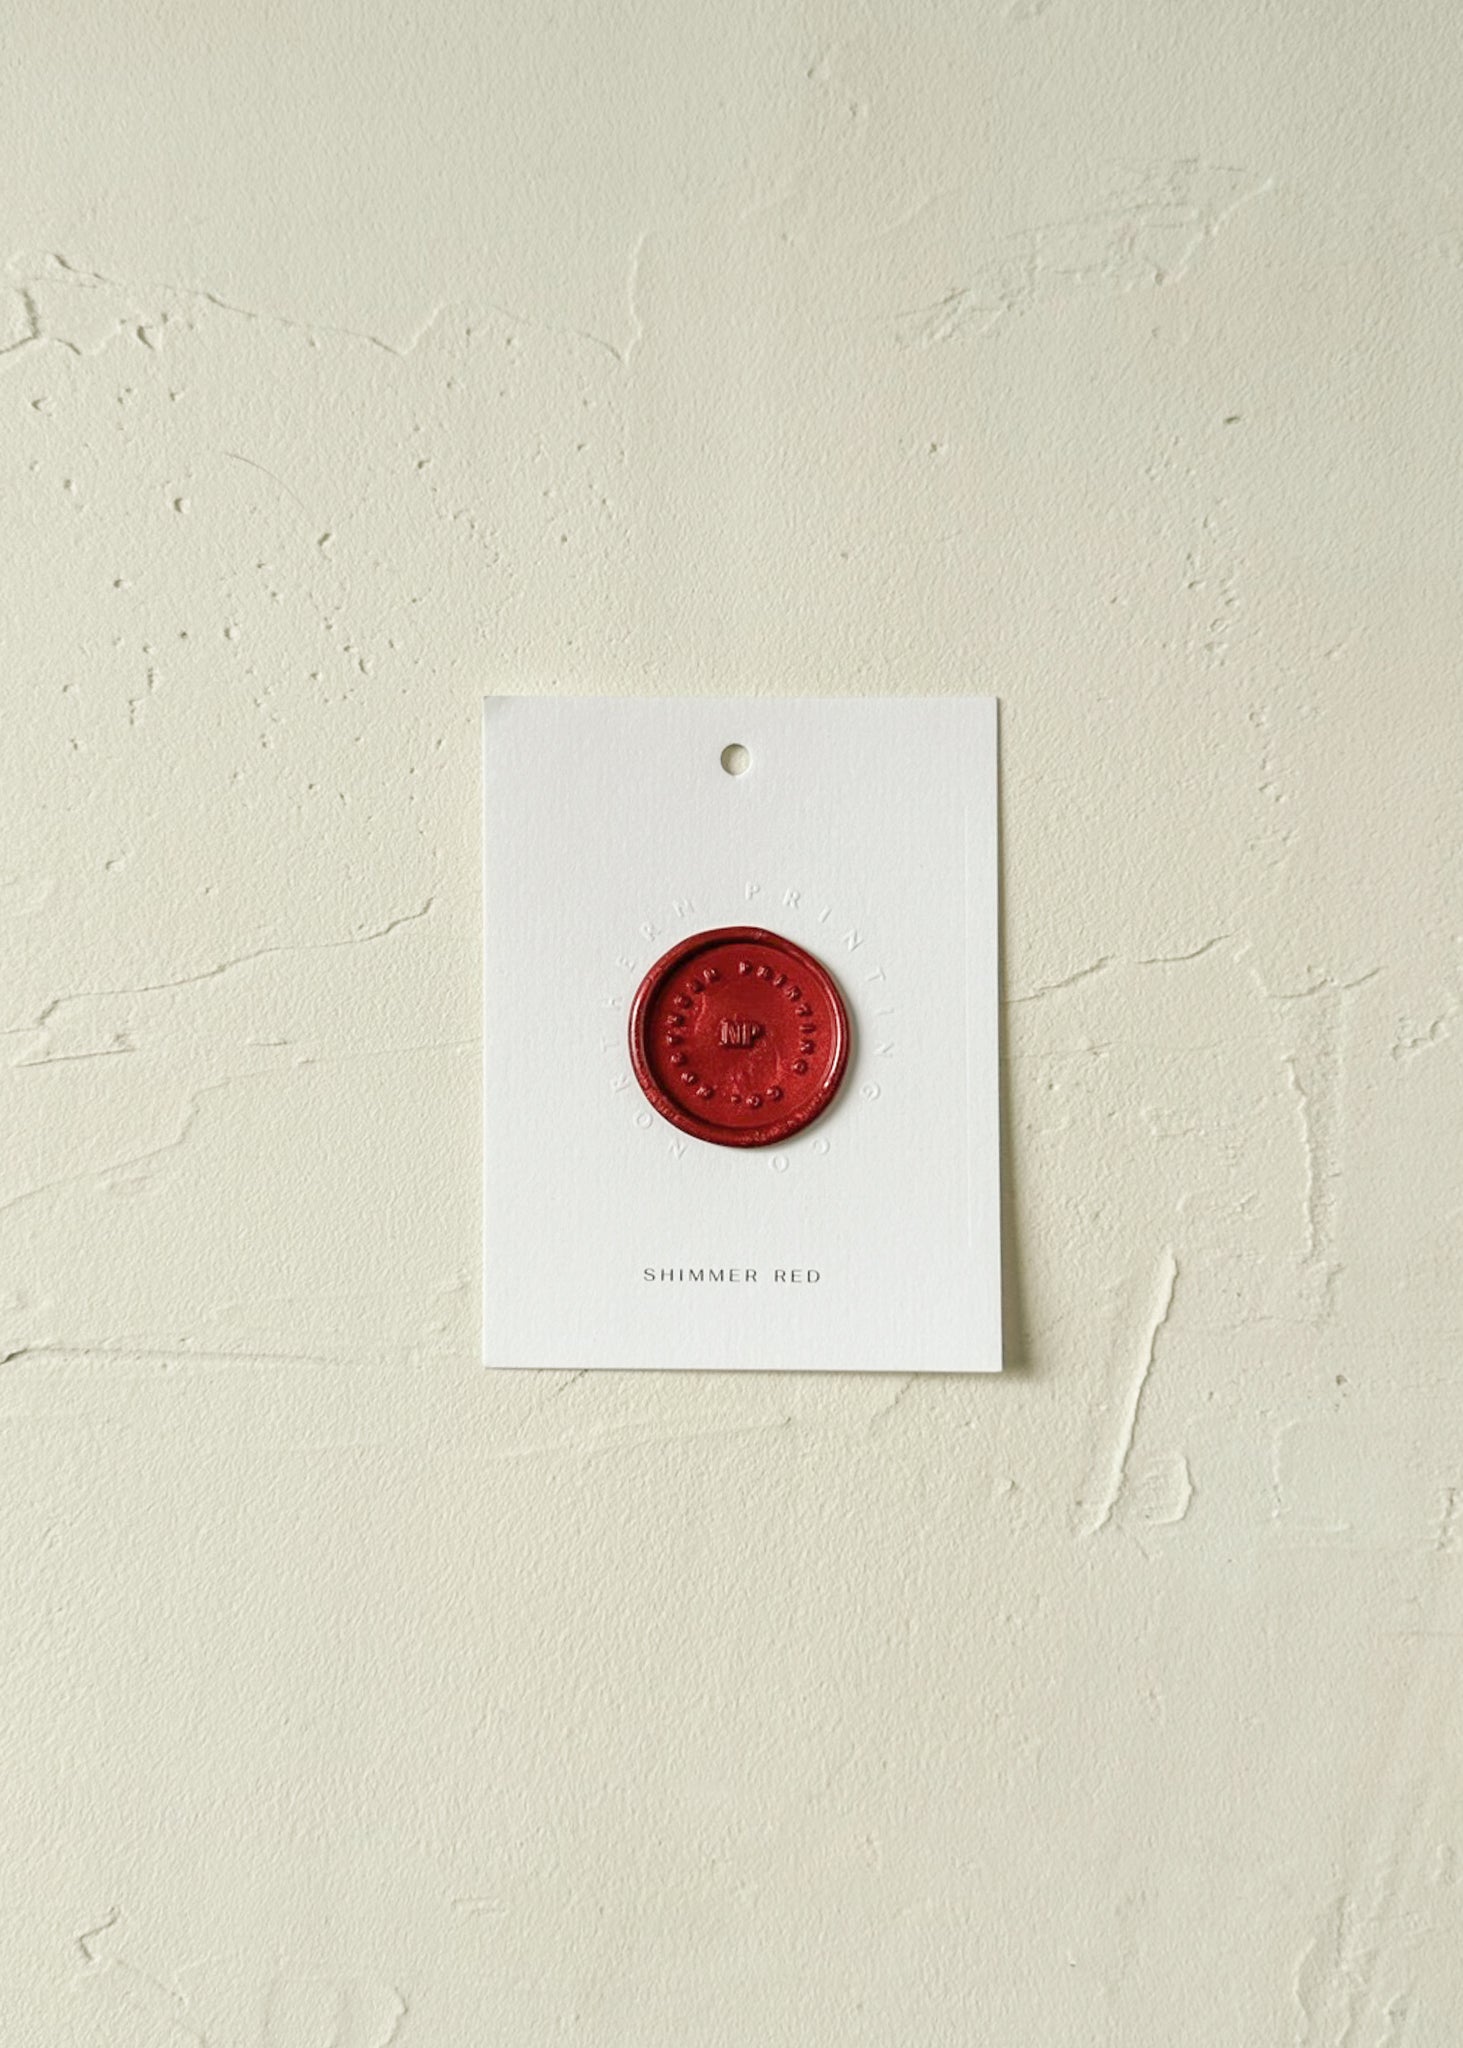 Elevated view of Shimmer Red wax seal stamp sample on textured background